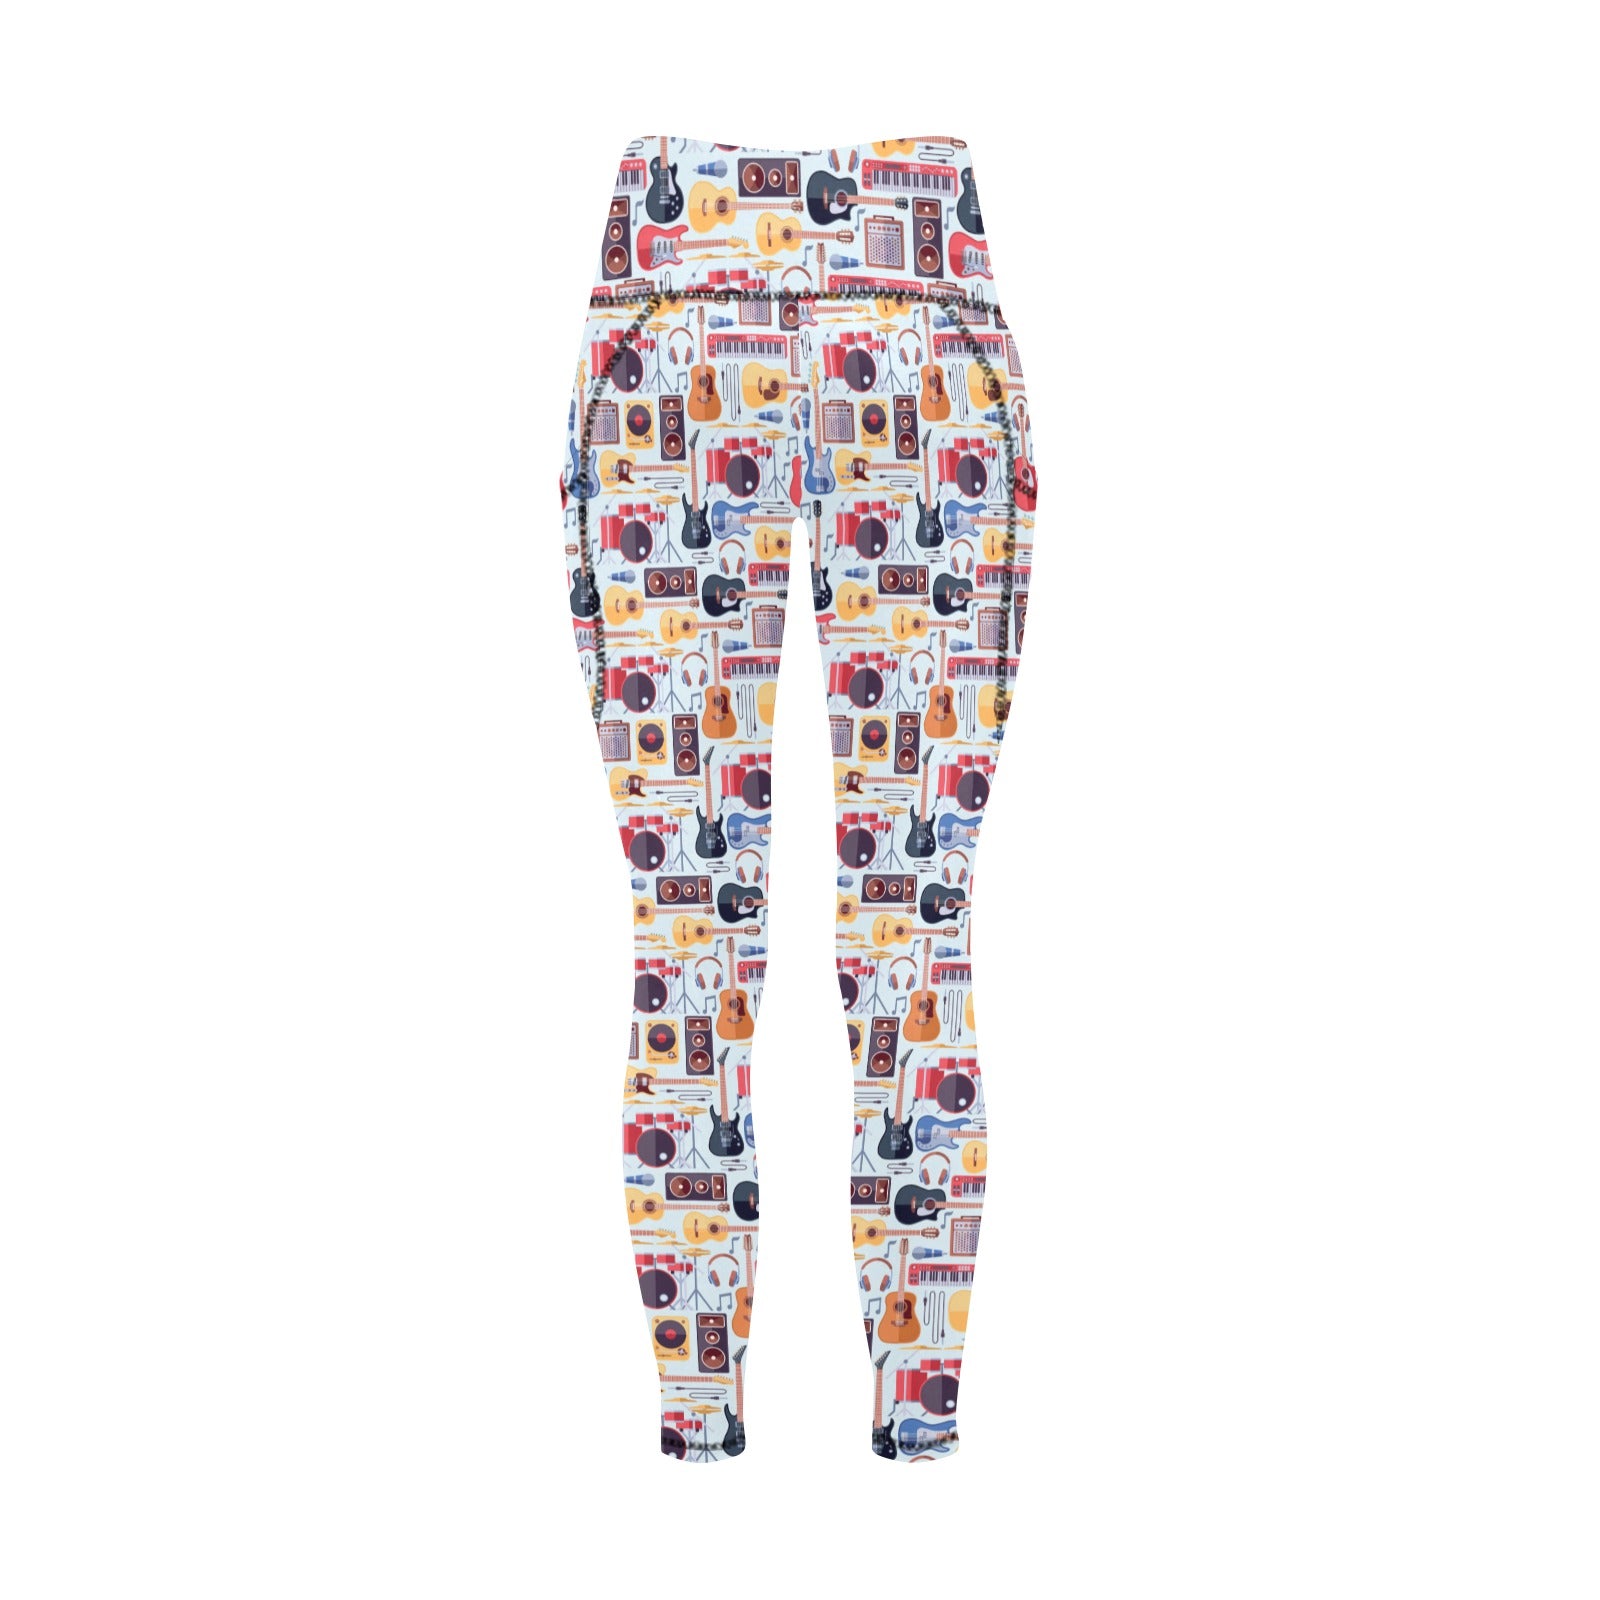 Music Instruments - Women's Leggings with Pockets Women's Leggings with Pockets S - 2XL Music